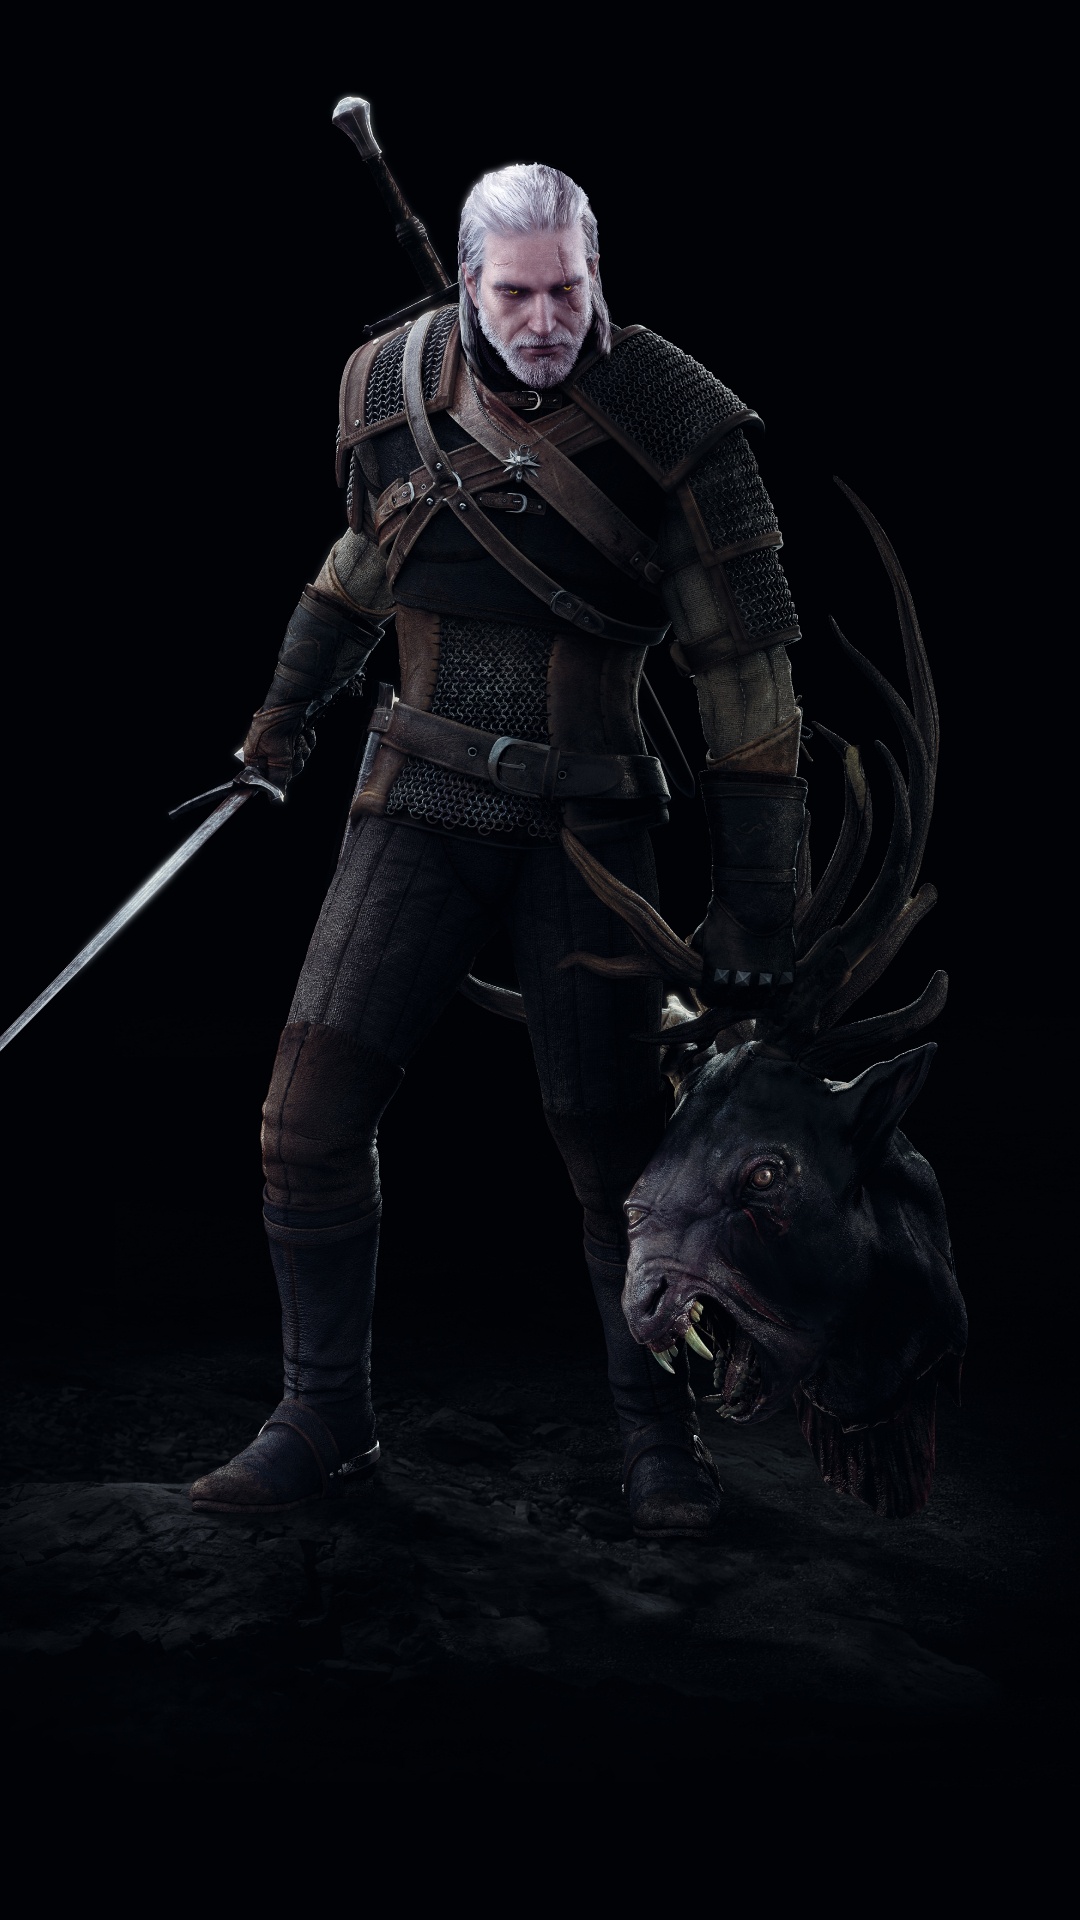 The Witcher 3 Wild Hunt, Geralt of Rivia, Darkness, Action Figure, Outerwear. Wallpaper in 1080x1920 Resolution